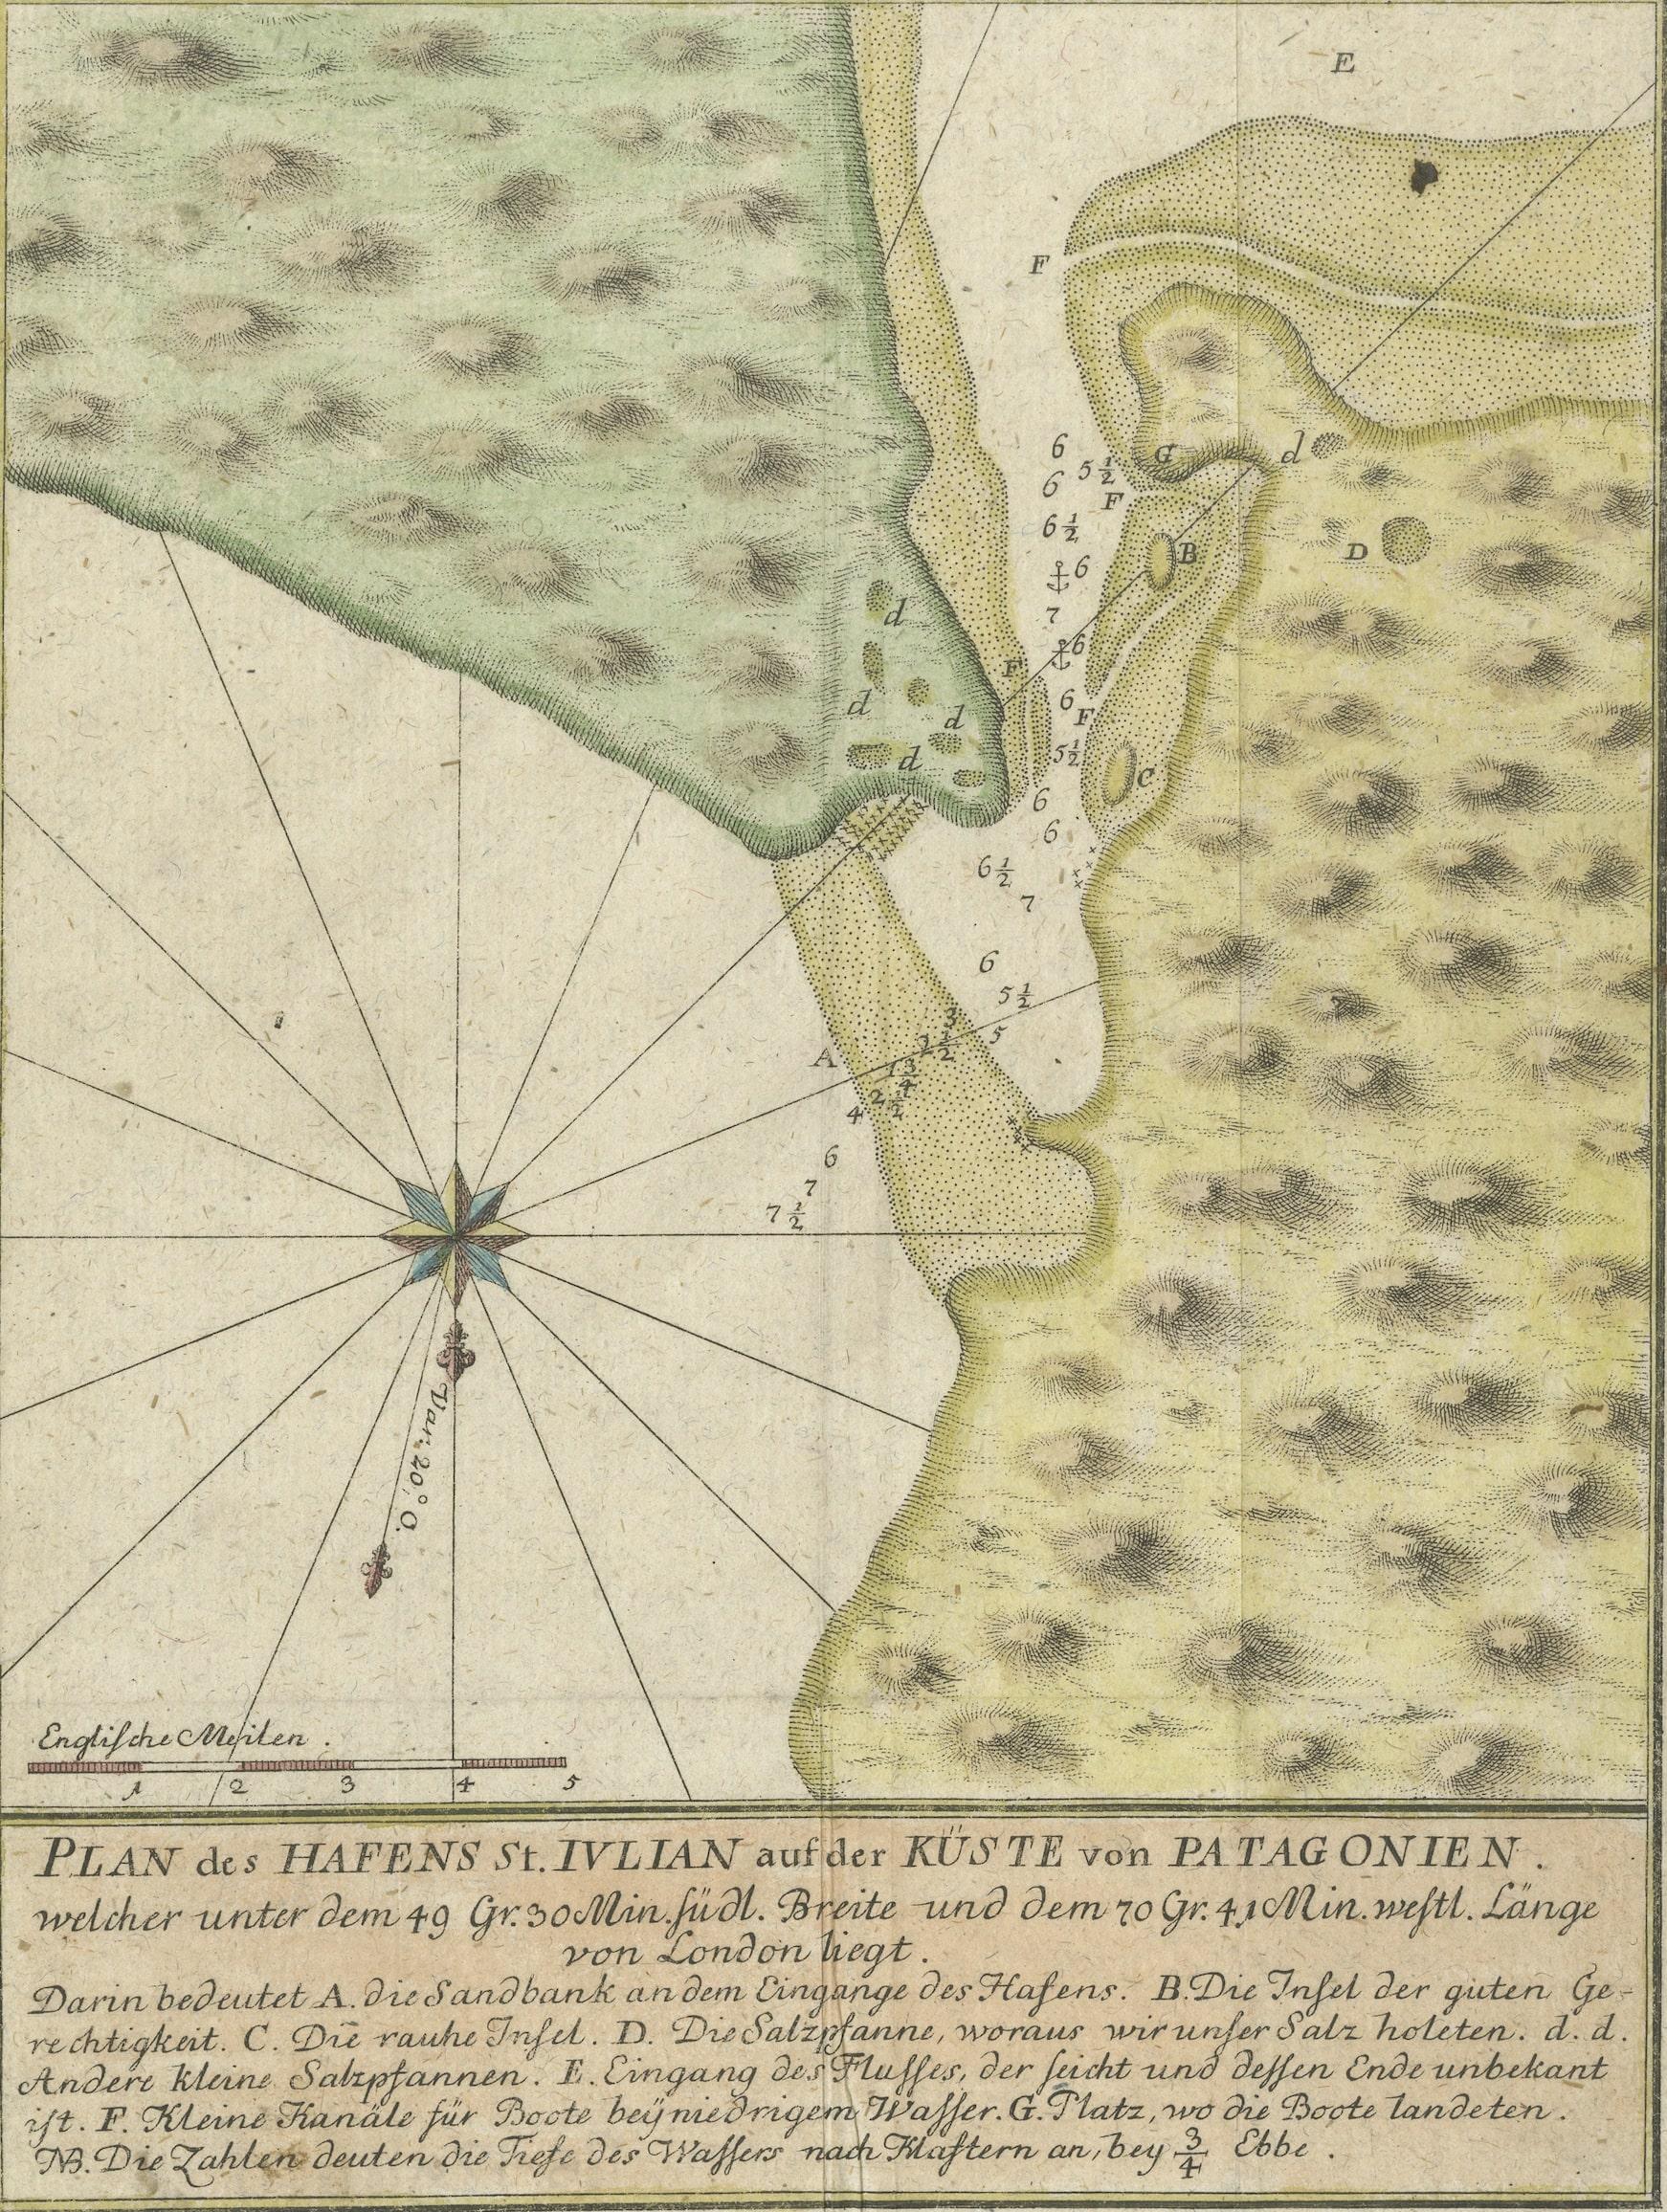 Antique map titled 'Plan des Hafens St. Iulian auf der Küste von Patagonien'. Plan of St. Julian's Harbour on the Coast of Patagonia. This map originates from a German edition of 'Voyage around the World' by Lord George Anson. Published 1763.